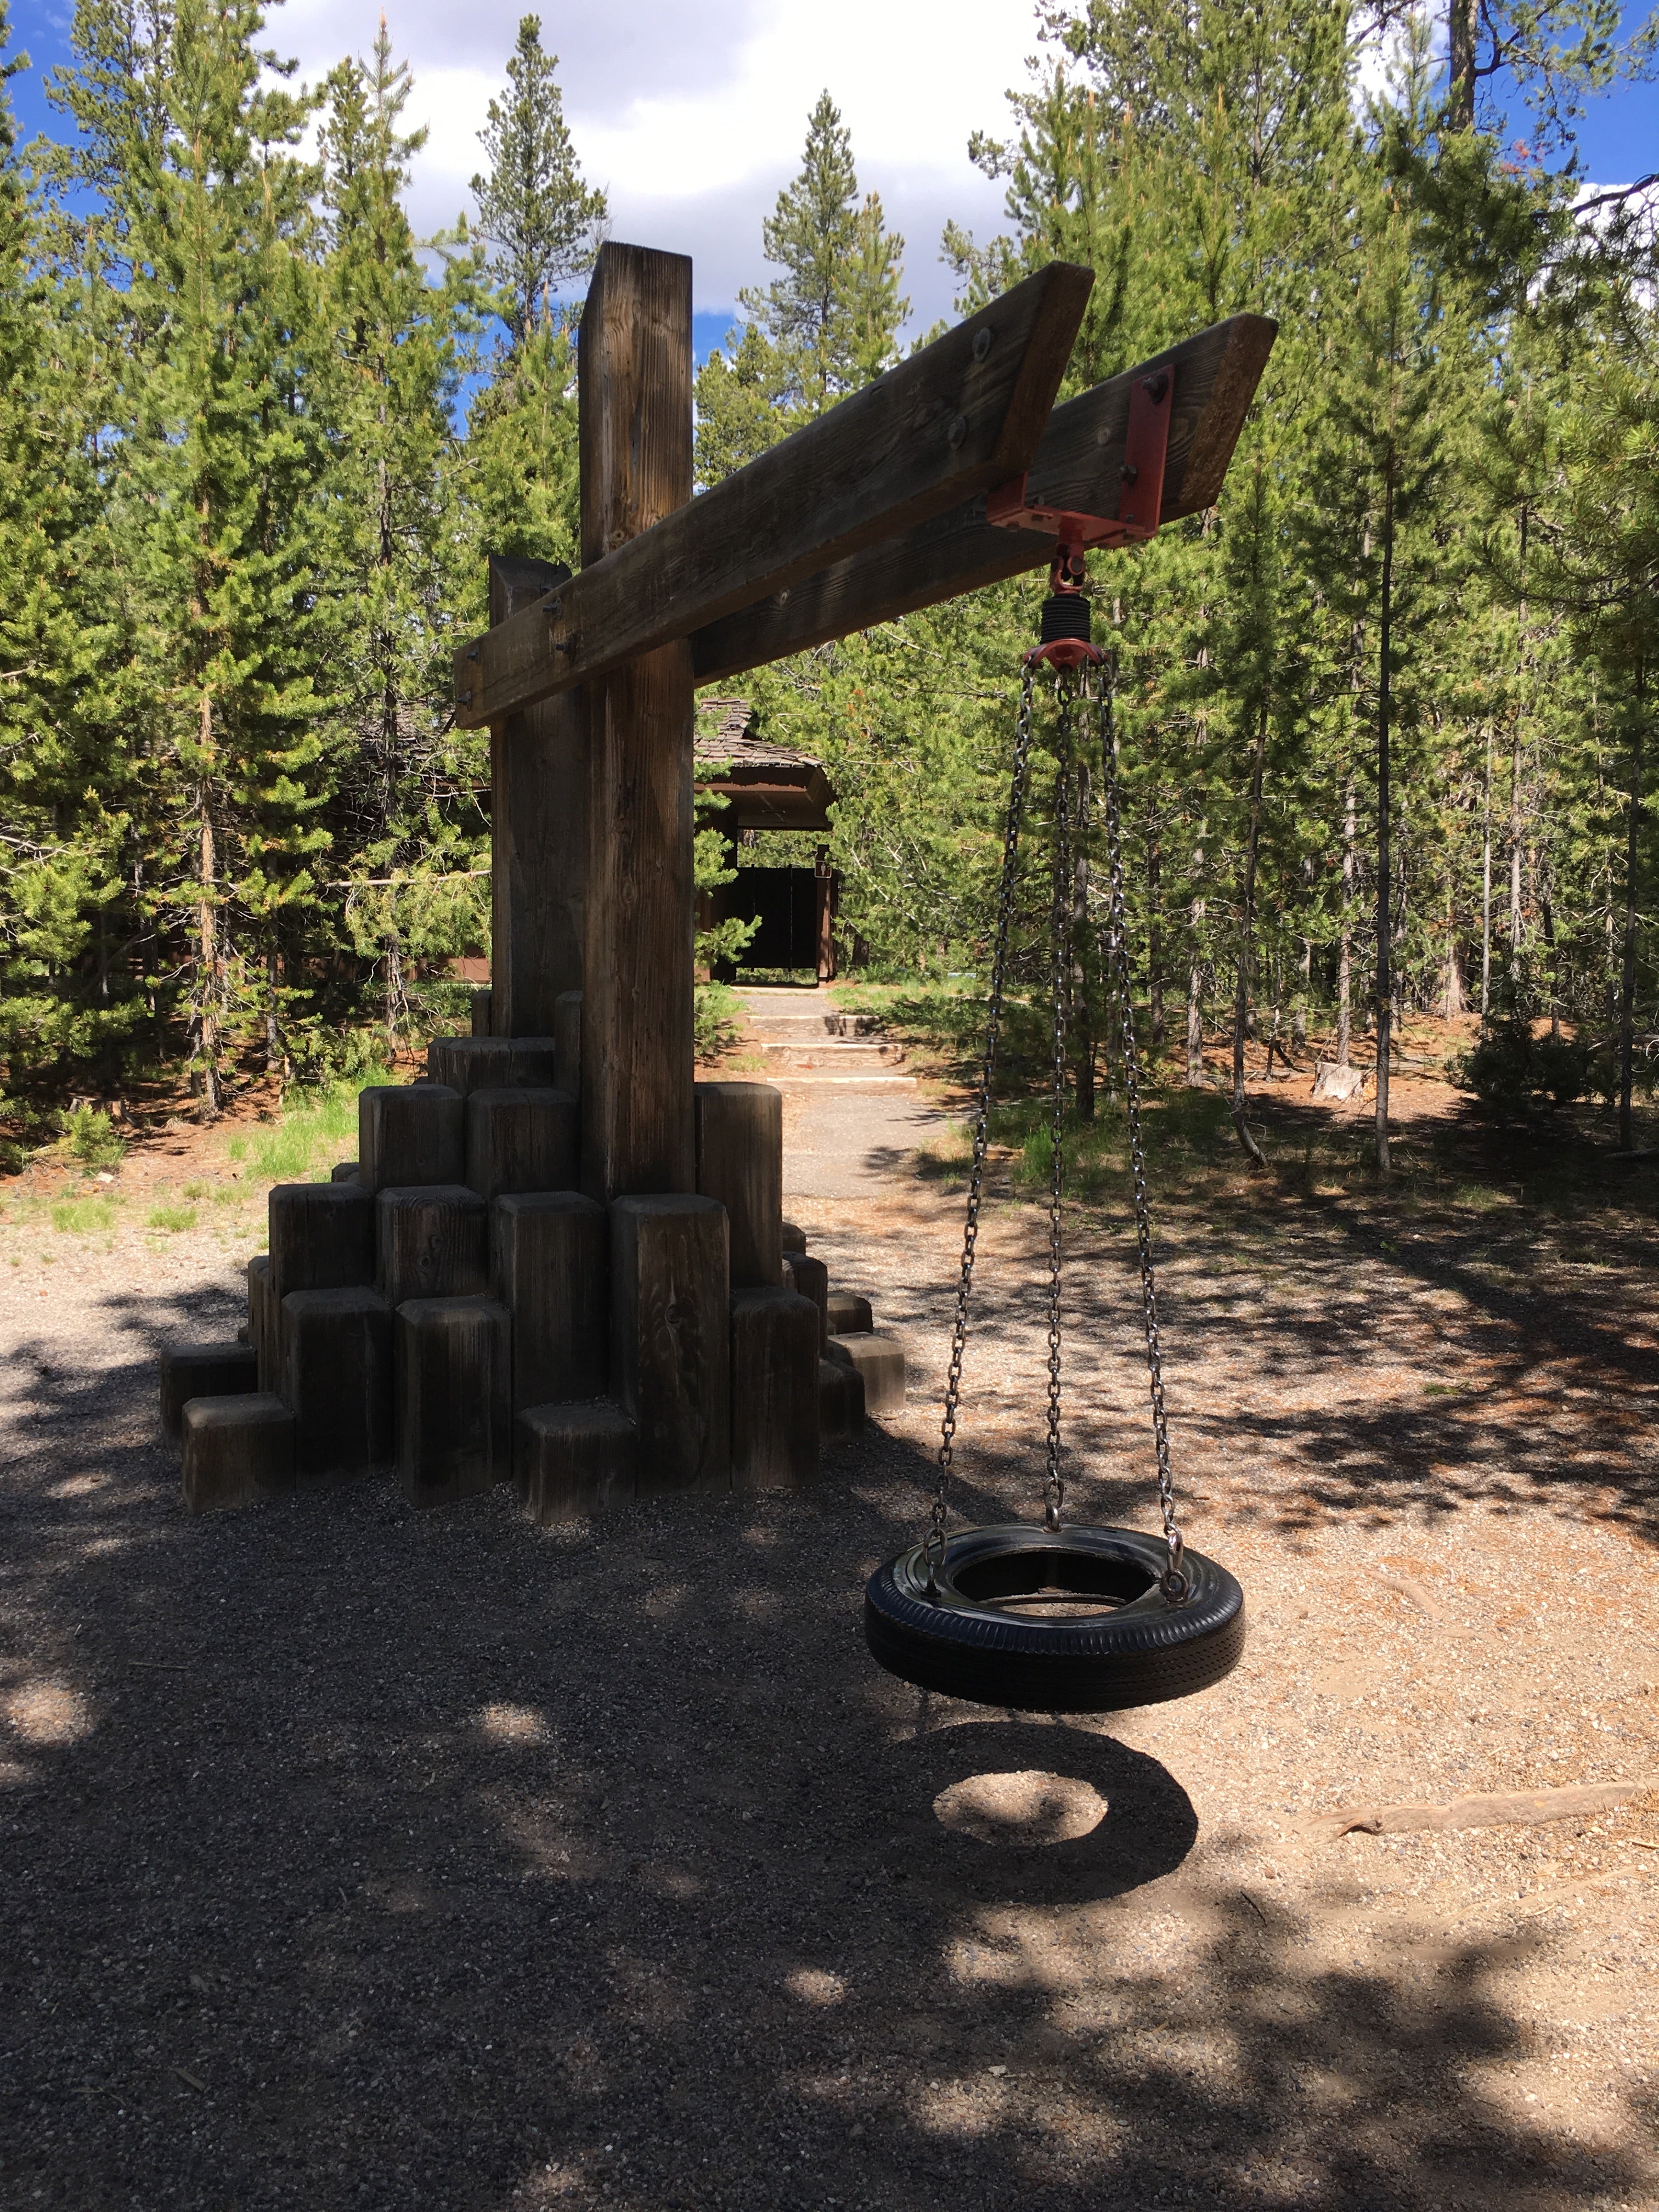 There are a couple nice playgrounds in the campground